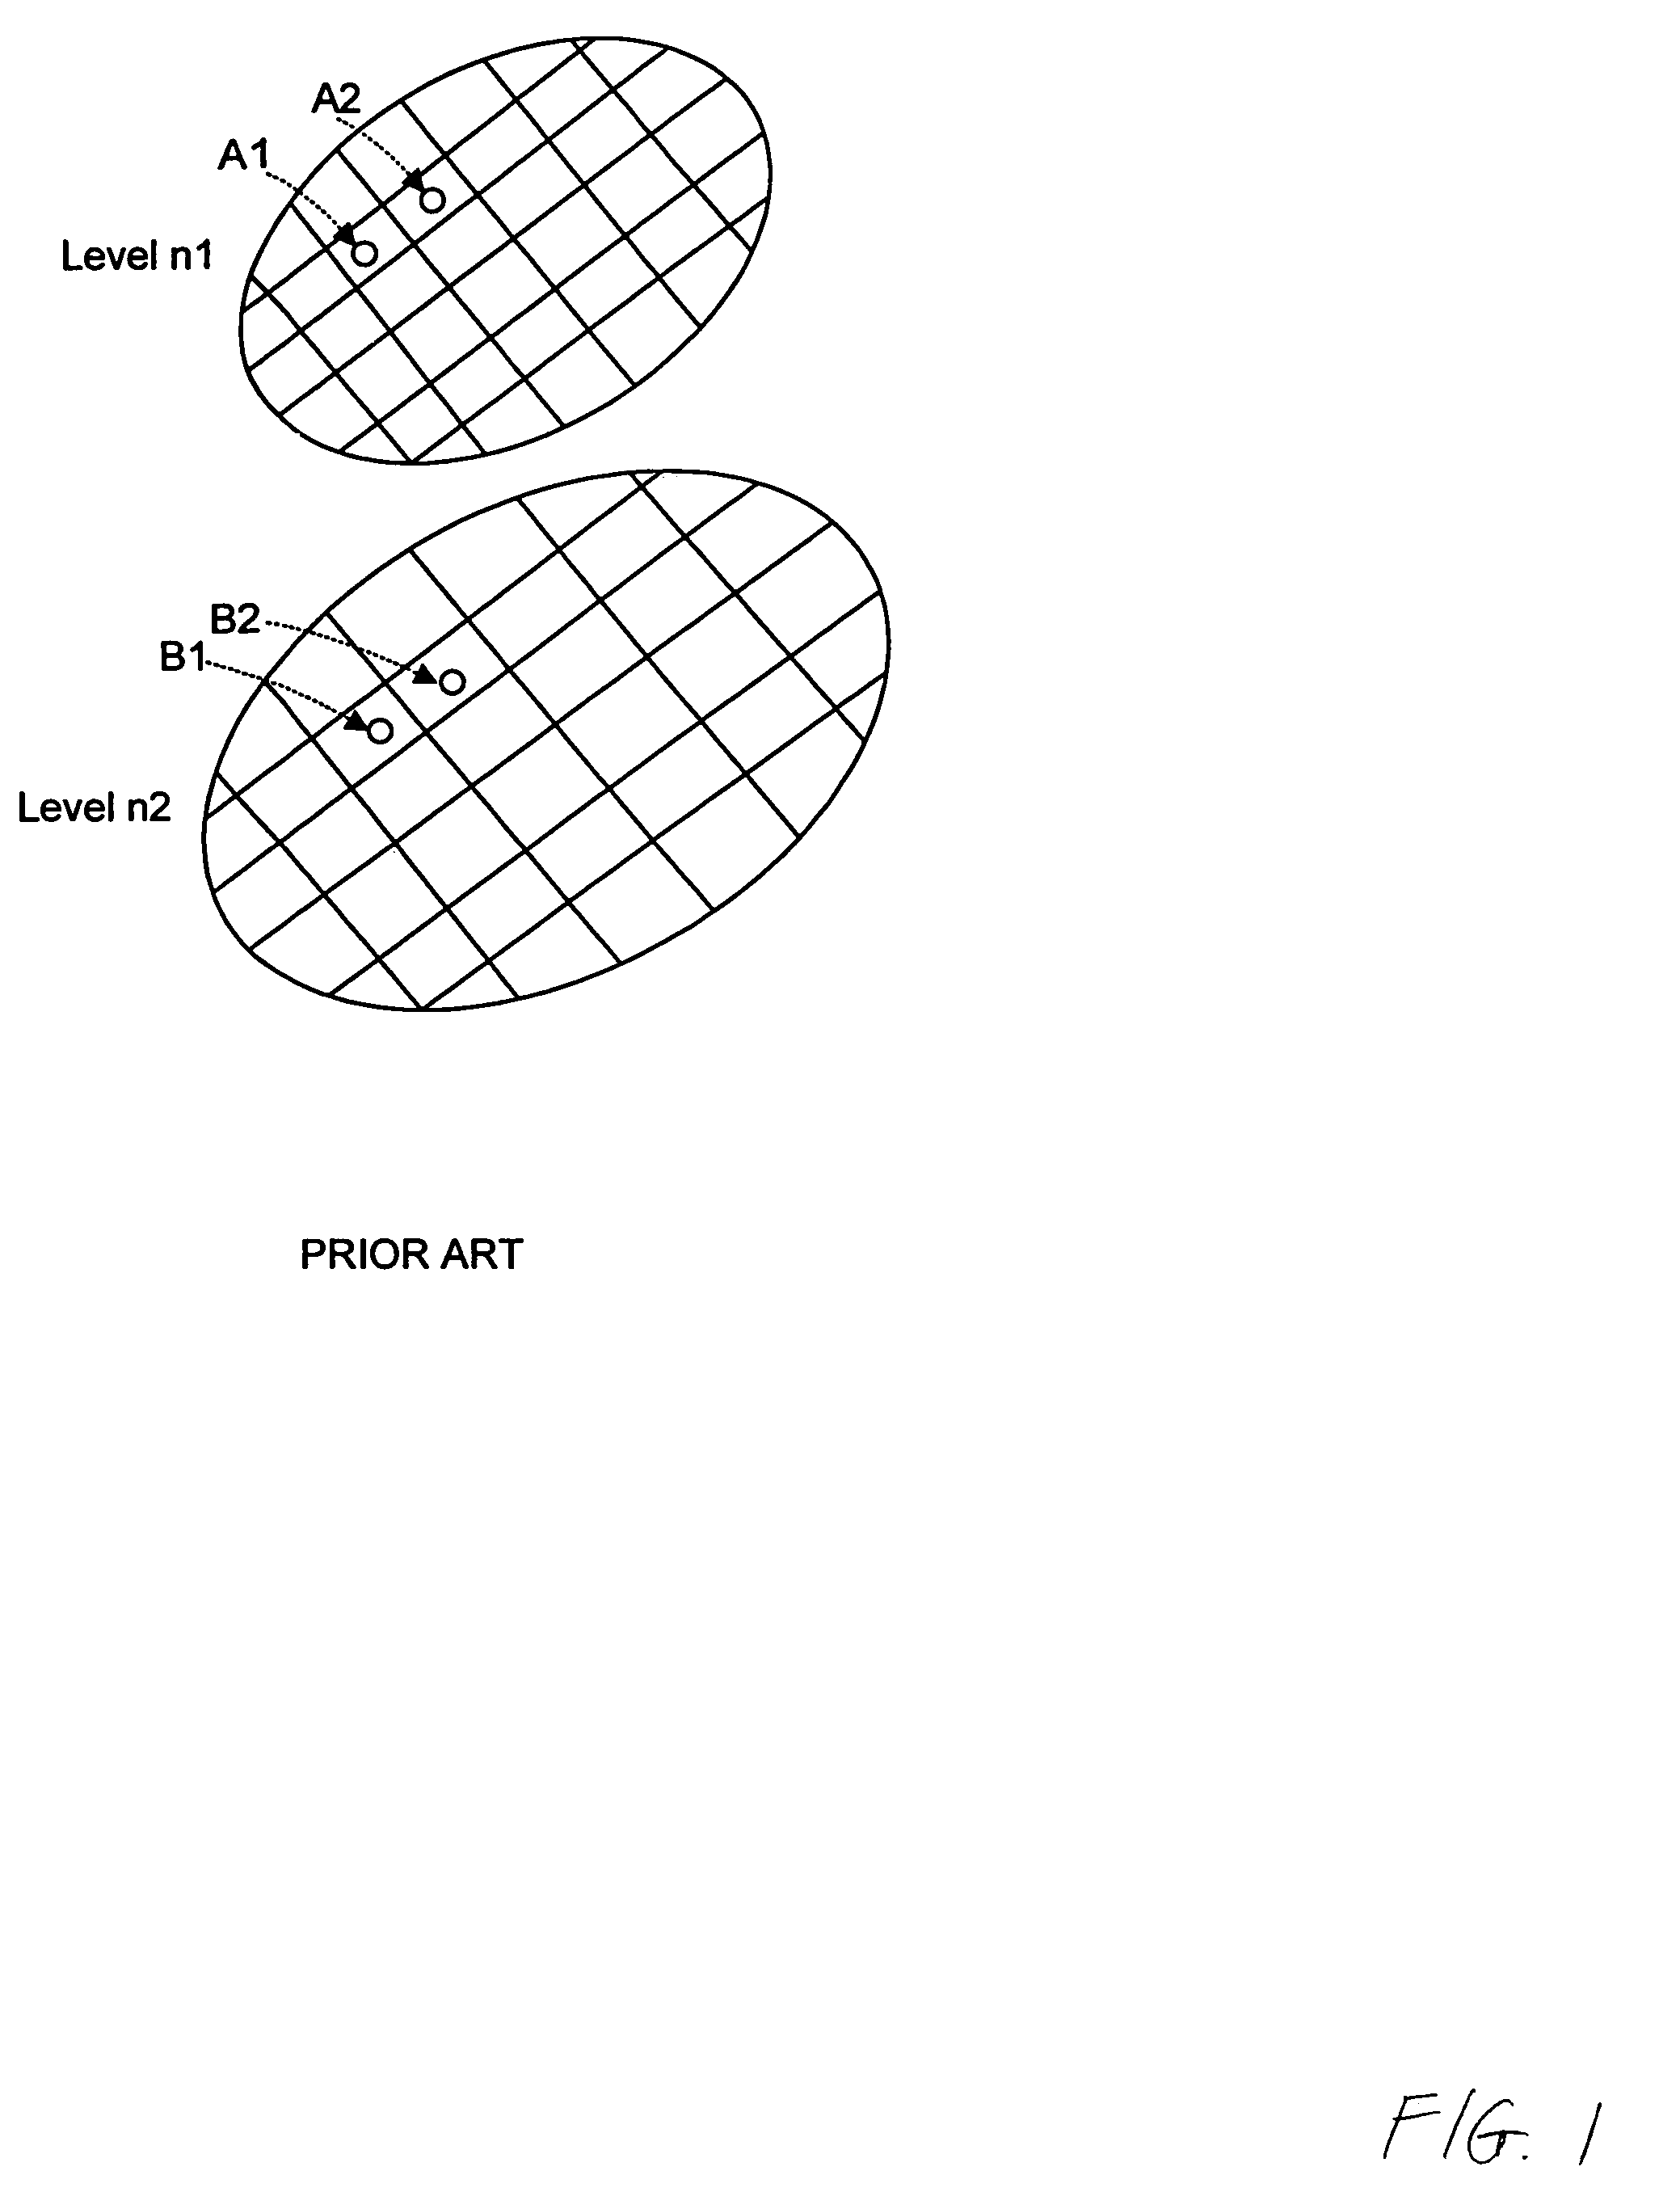 Single level MIP filtering algorithm for anisotropic texturing